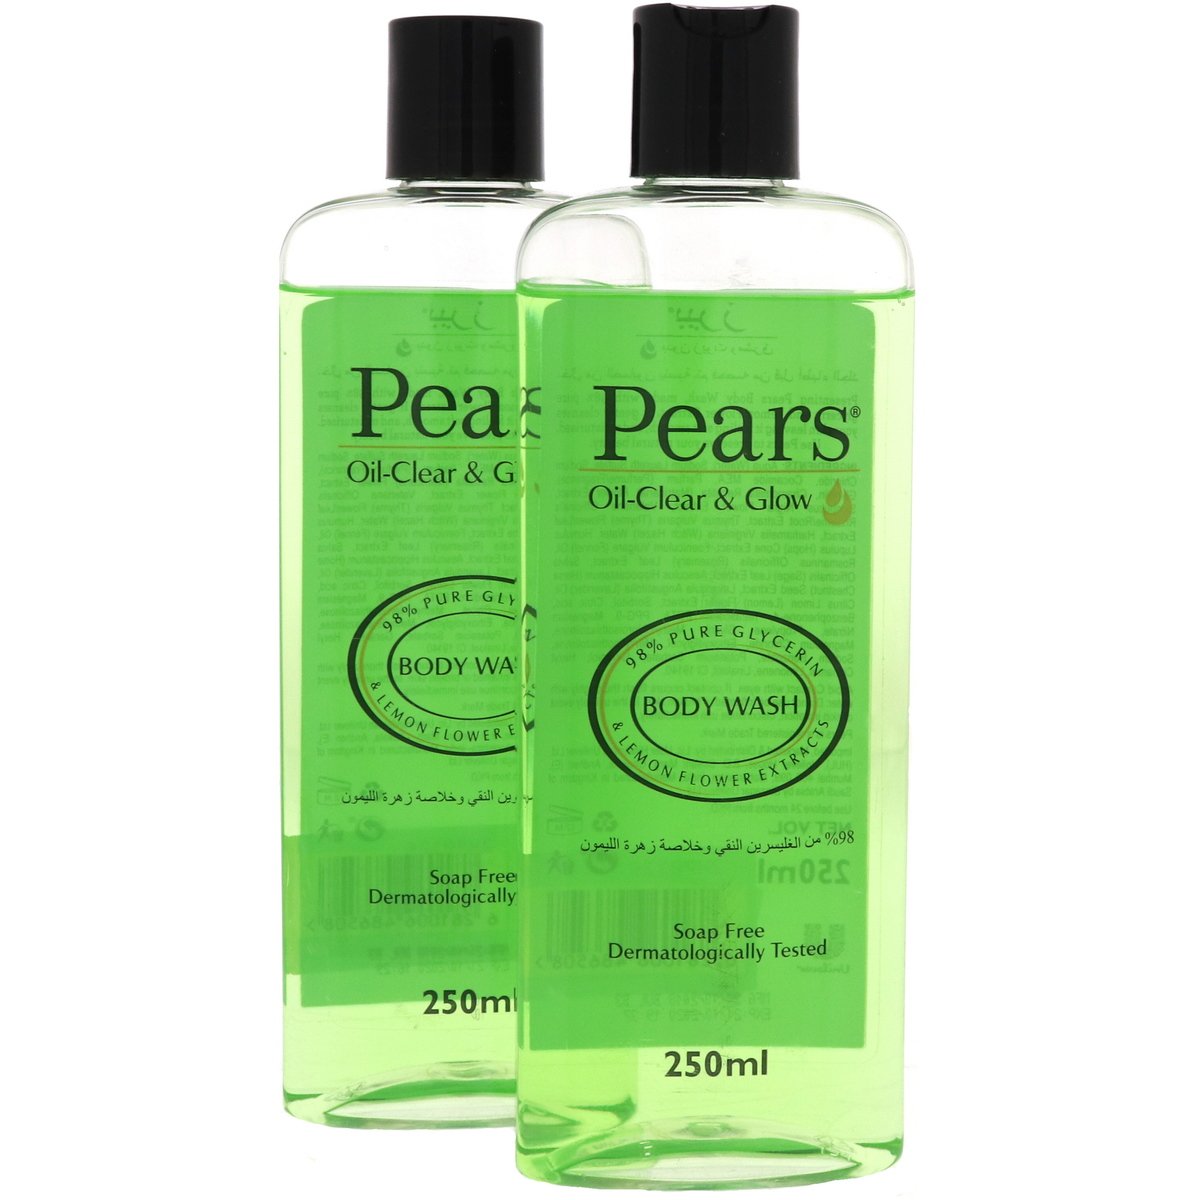 Pears Body Wash Oil-Clear And Glow 2 x 250 ml